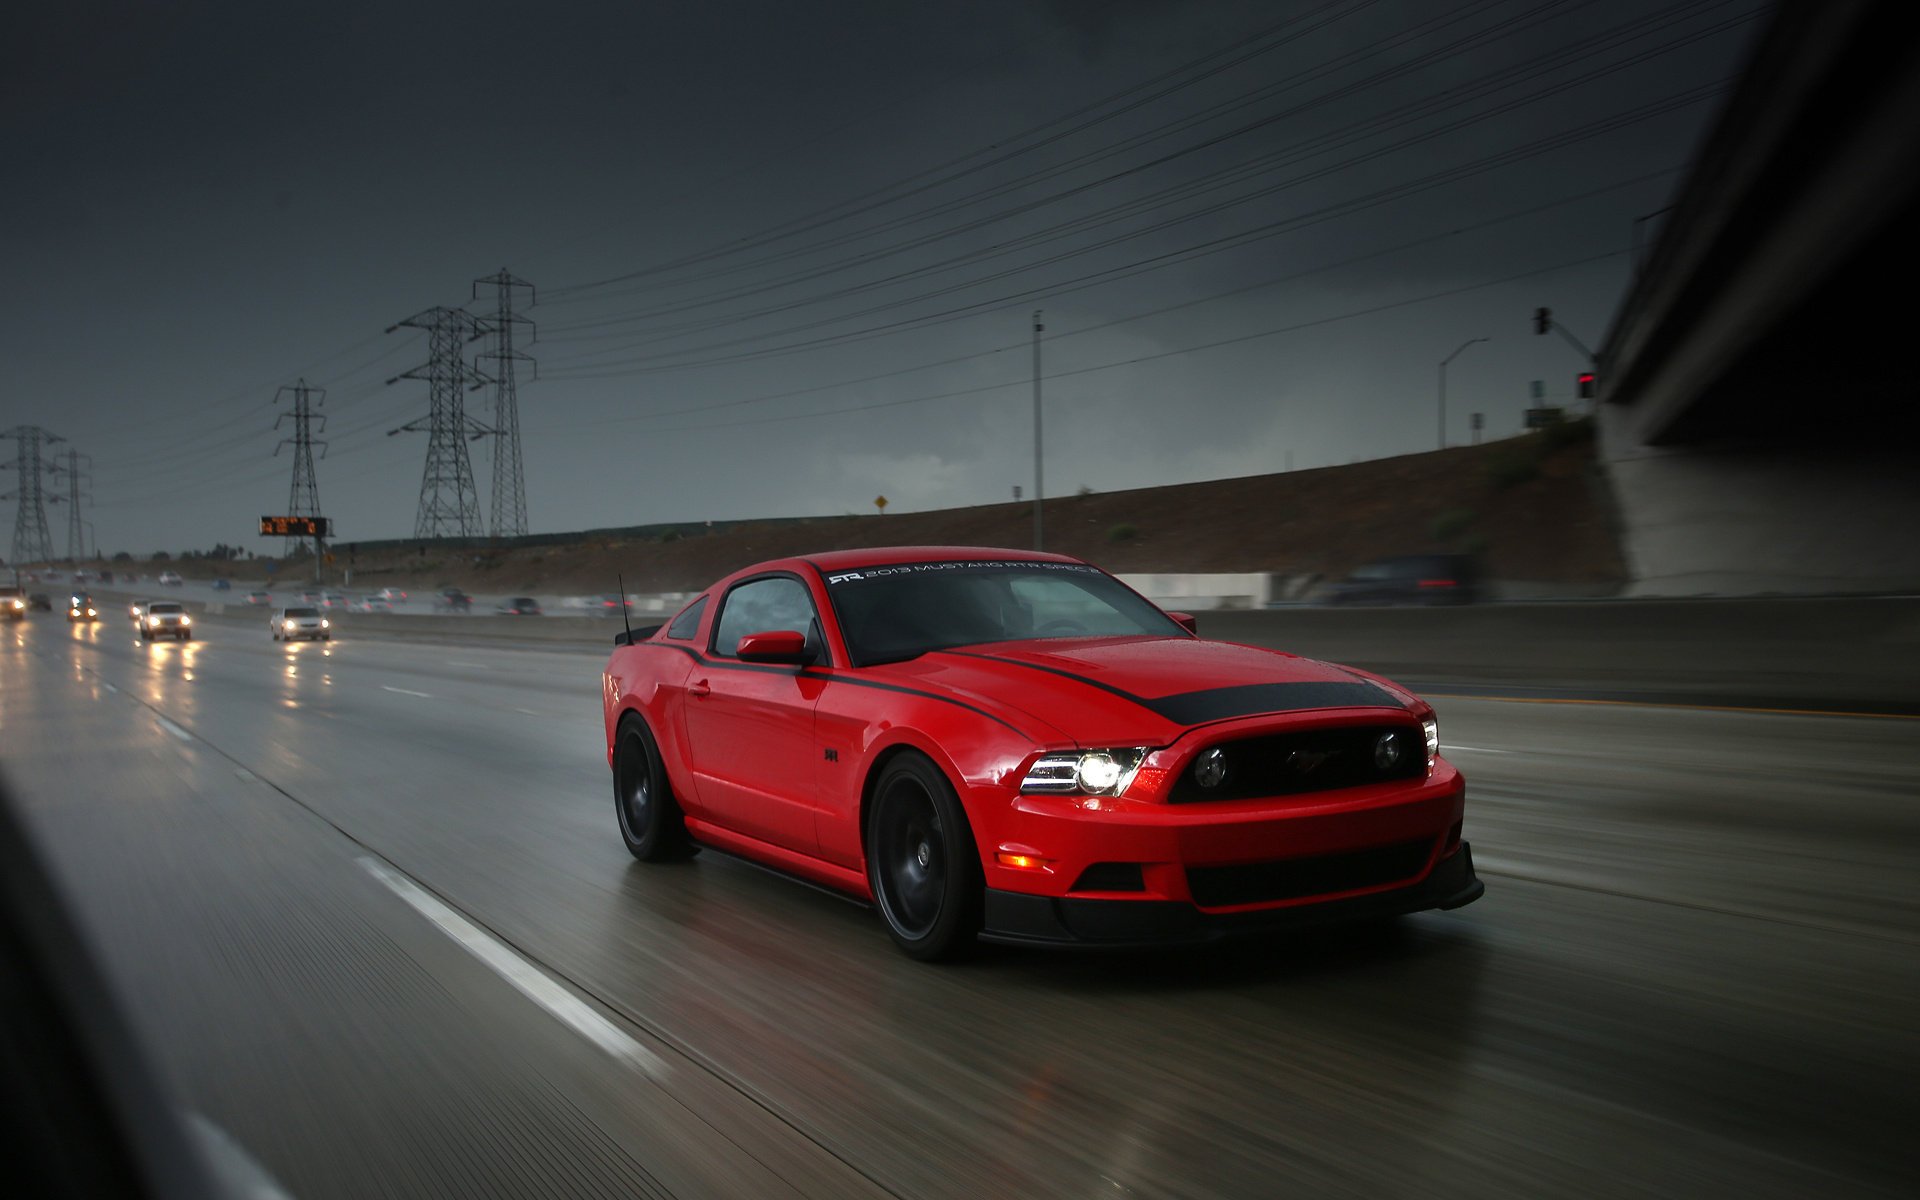 Red Ford Mustang on the road in the rain